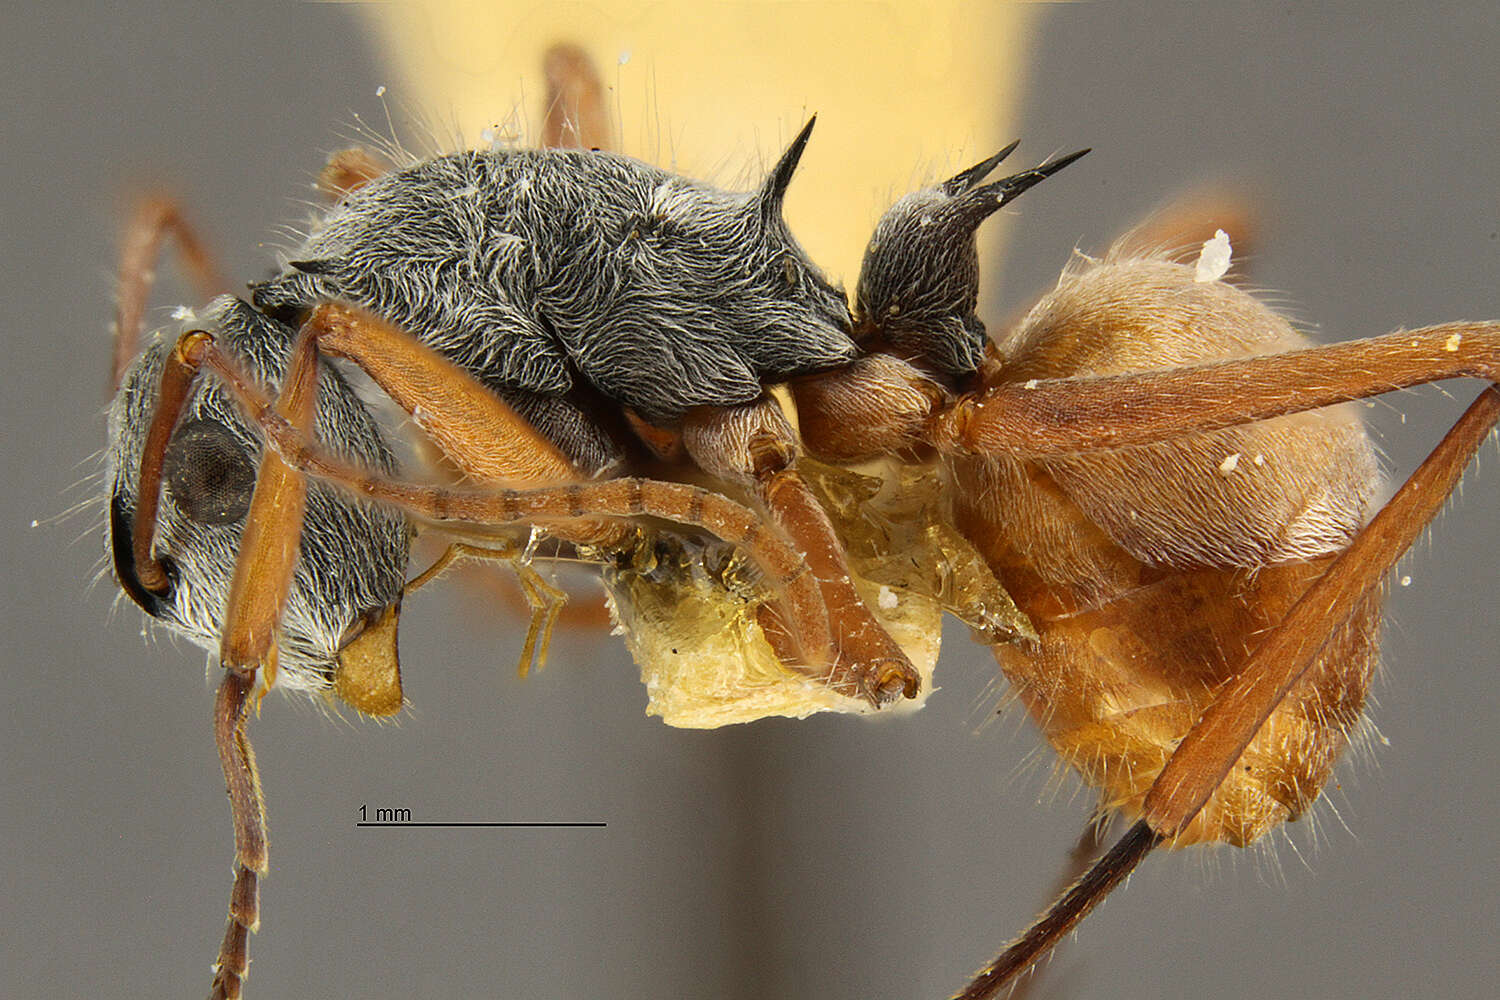 Image of Polyrhachis bicolor Smith 1858